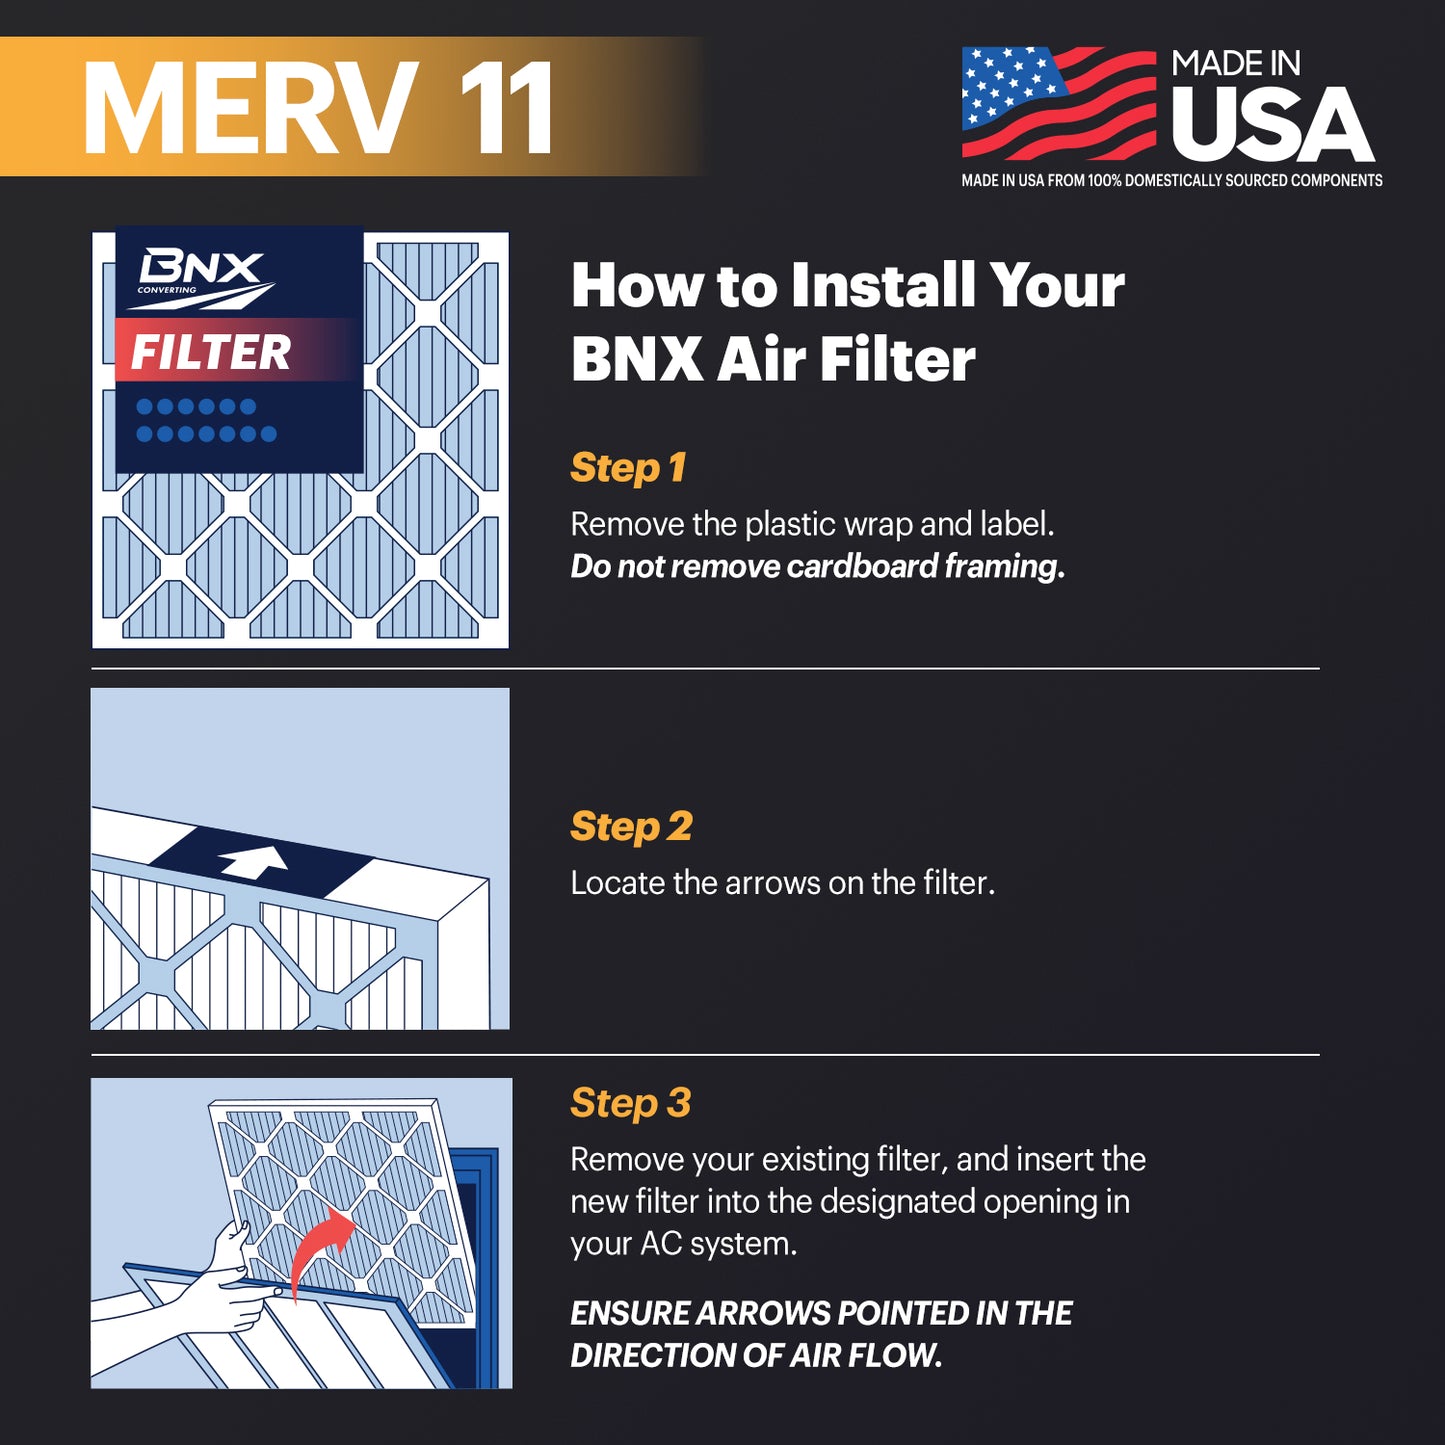 BNX 14x20x1 MERV 11 Air Filter 6 Pack - MADE IN USA - Electrostatic Pleated Air Conditioner HVAC AC Furnace Filters - Removes Dust, Mold, Pollen, Lint, Pet Dander, Smoke, Smog